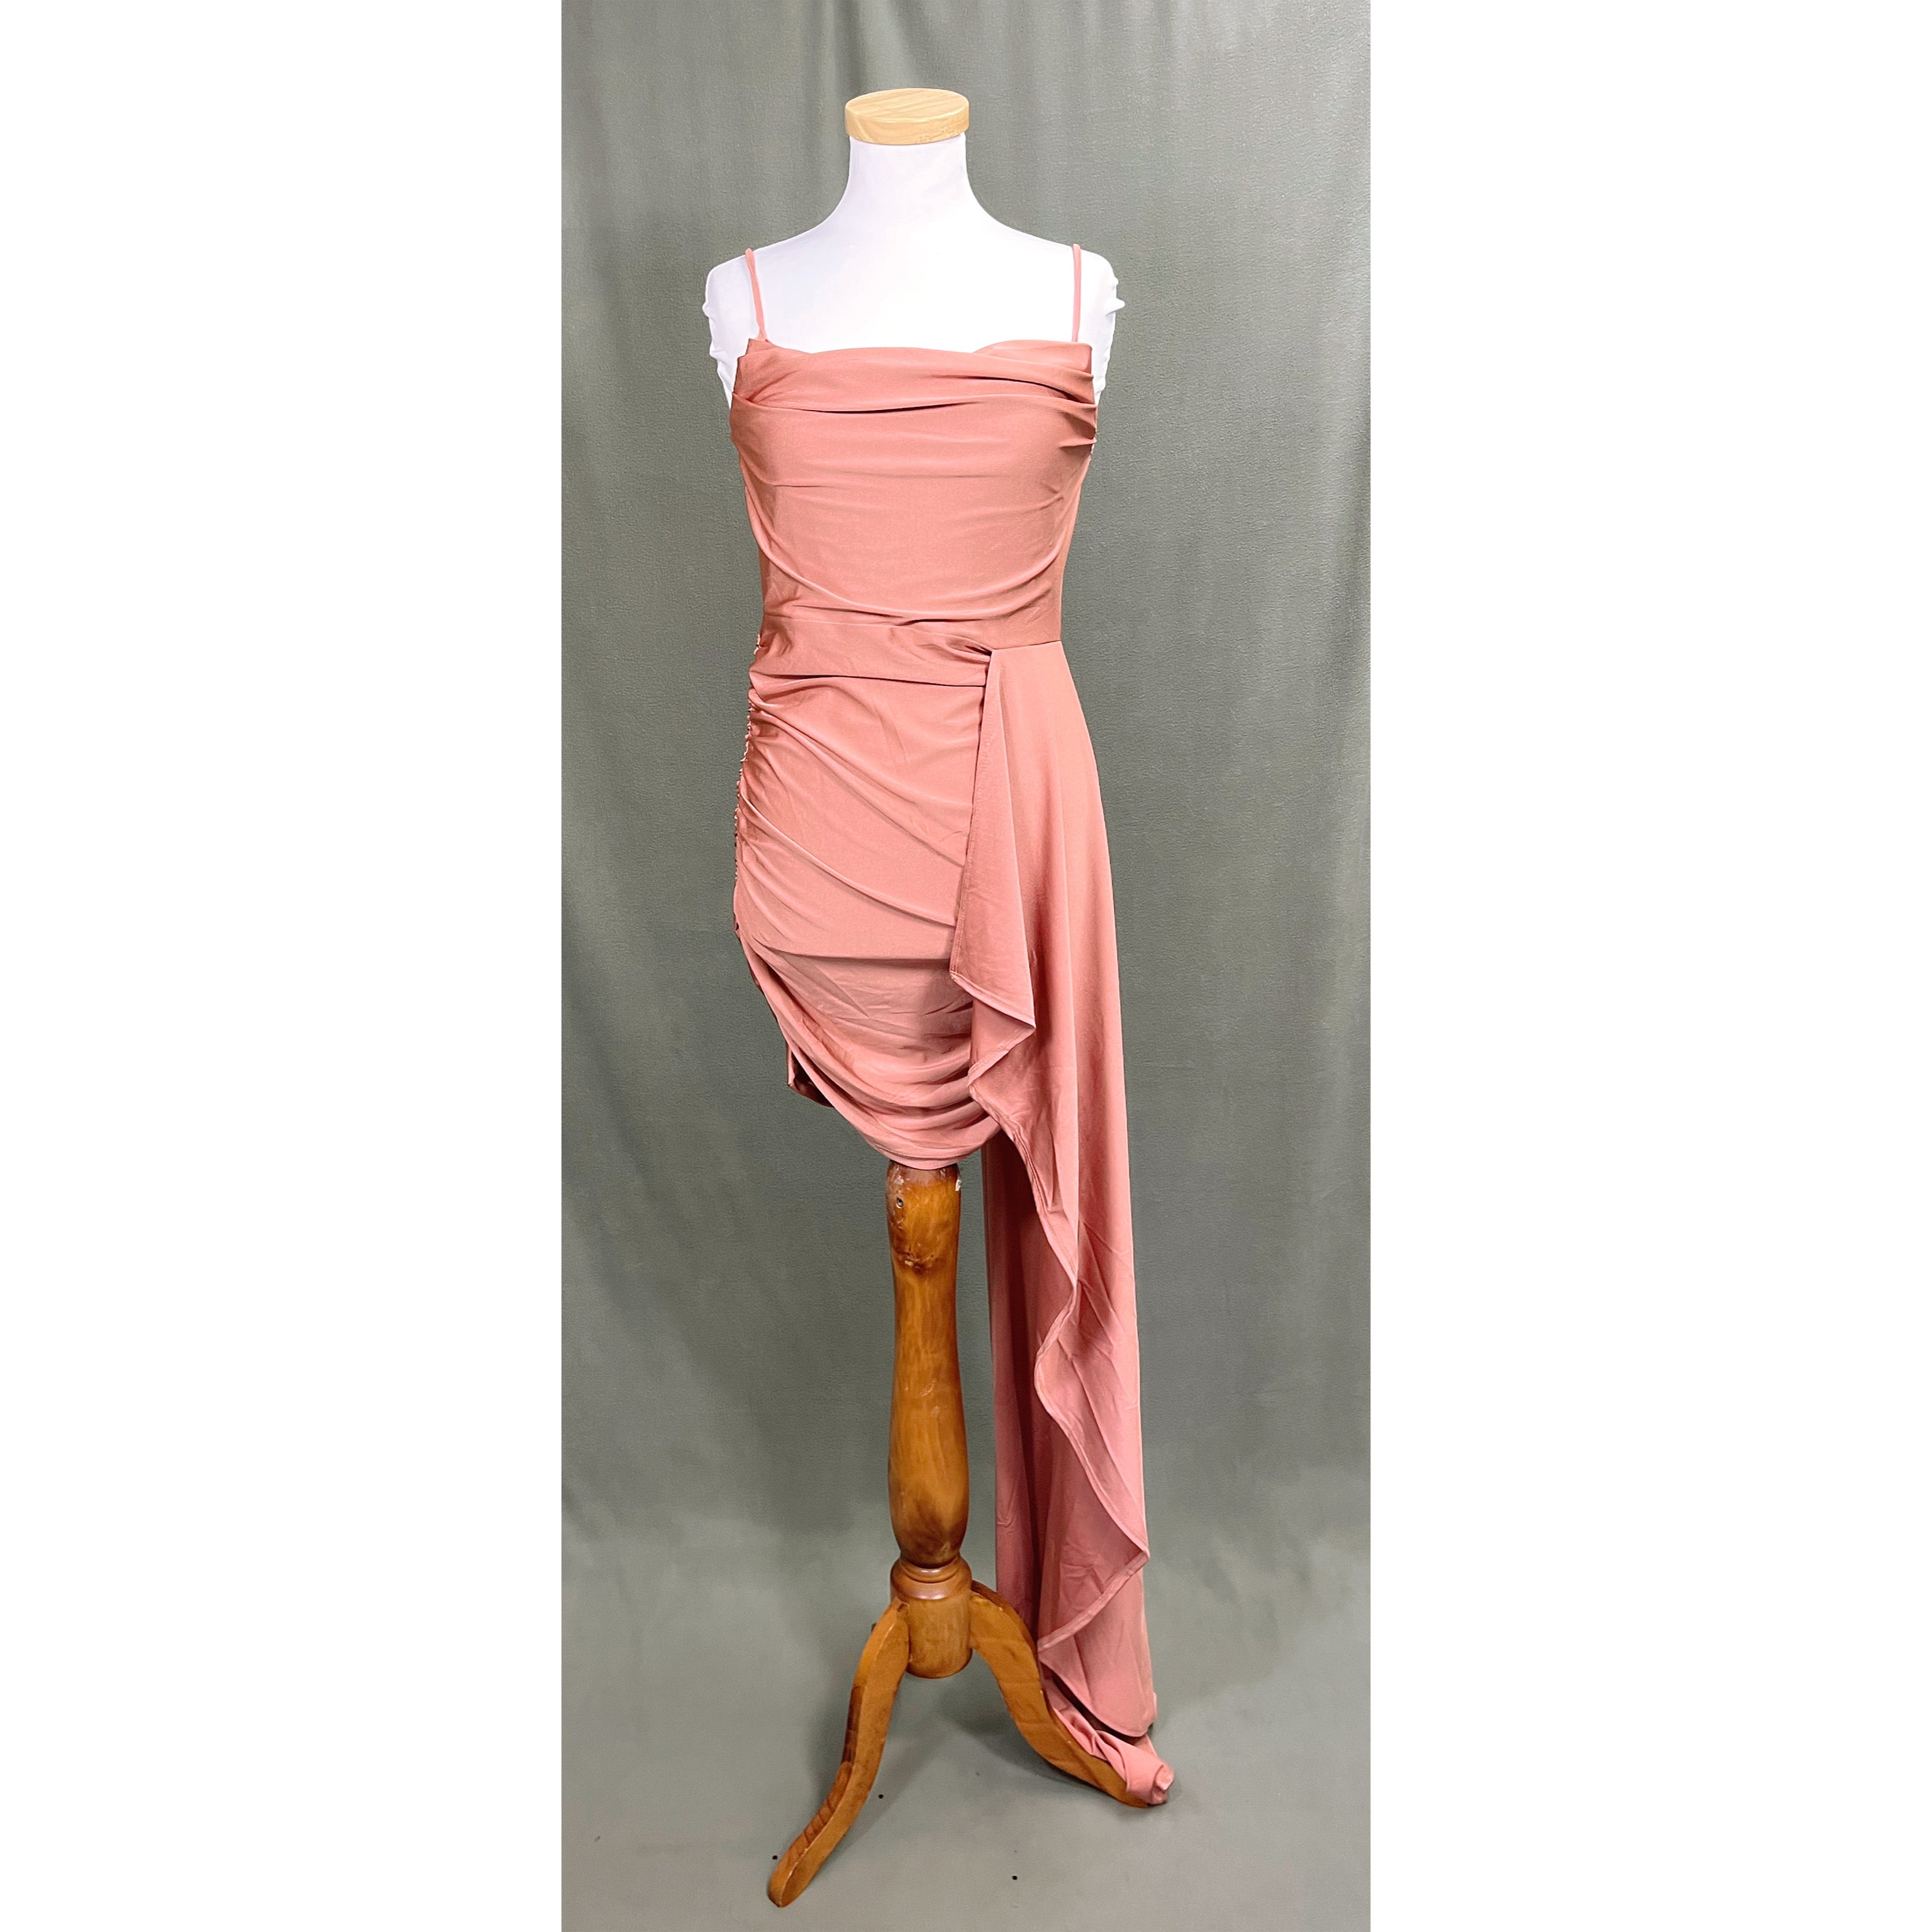 Cefian blush short dress with train, sizes S and M, NEW WITH TAGS!